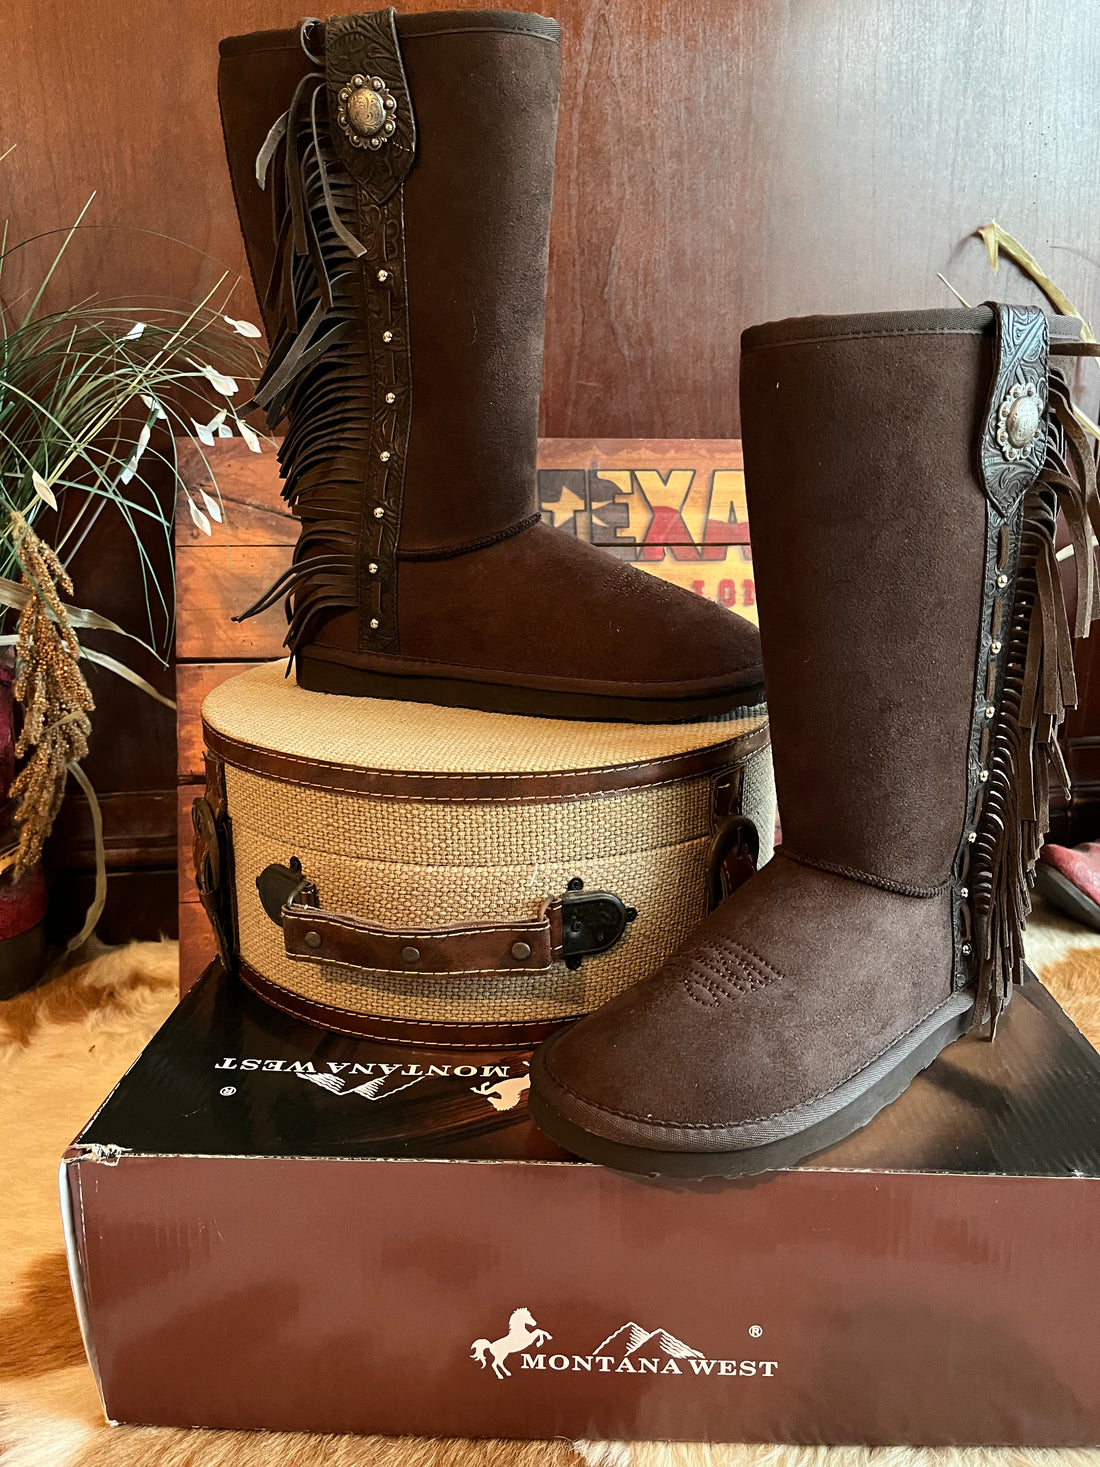 Montana West Dark Brown Fringed Mid Calf Boots with Fringe and Conchos